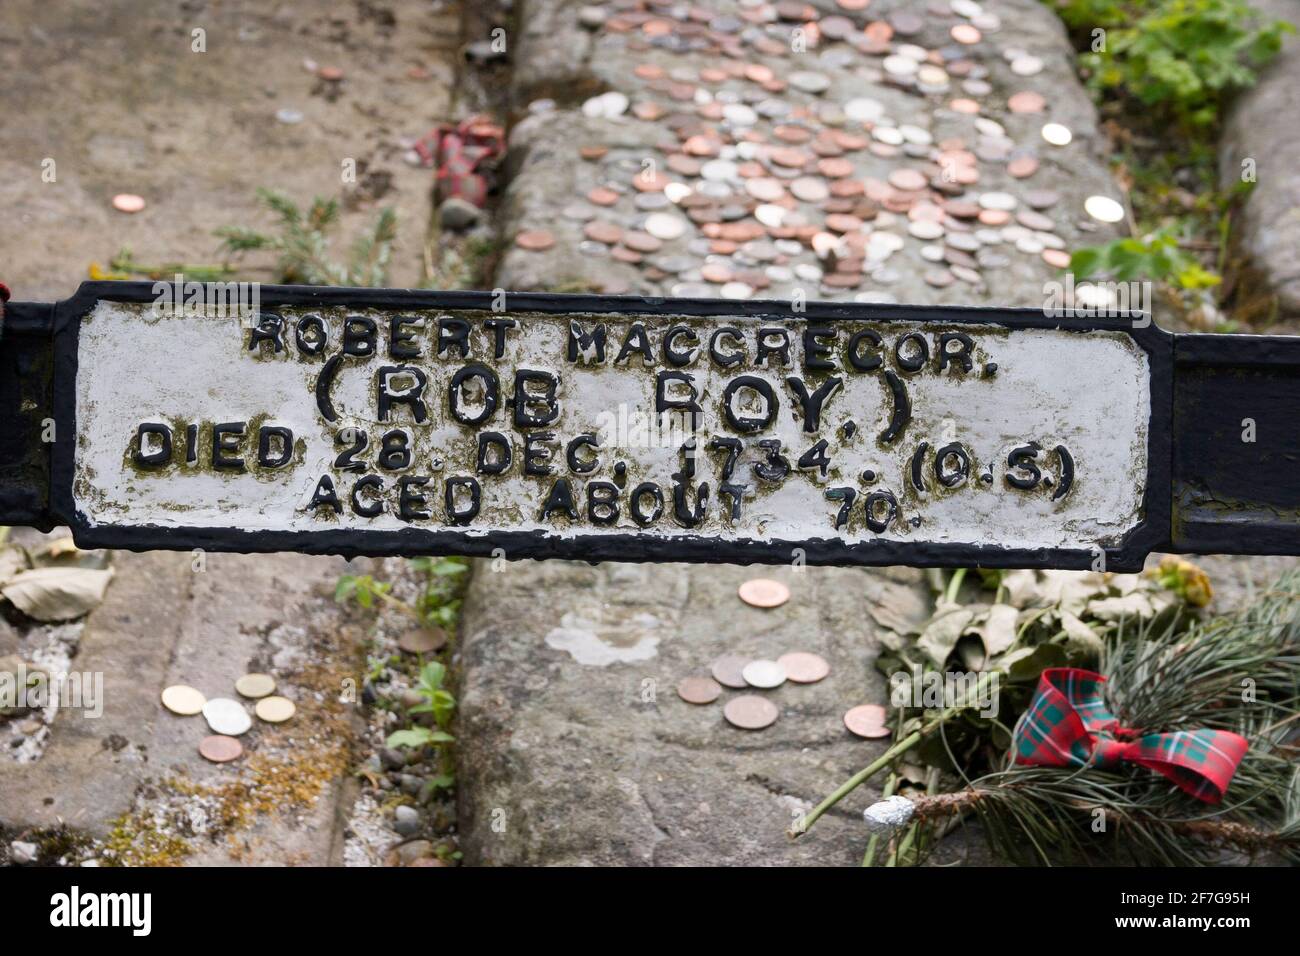 Name plate on the Grave of Rob Roy McGregor at Balquidder Parish Church graveyard, Stirlingshire, Scotland Stock Photo